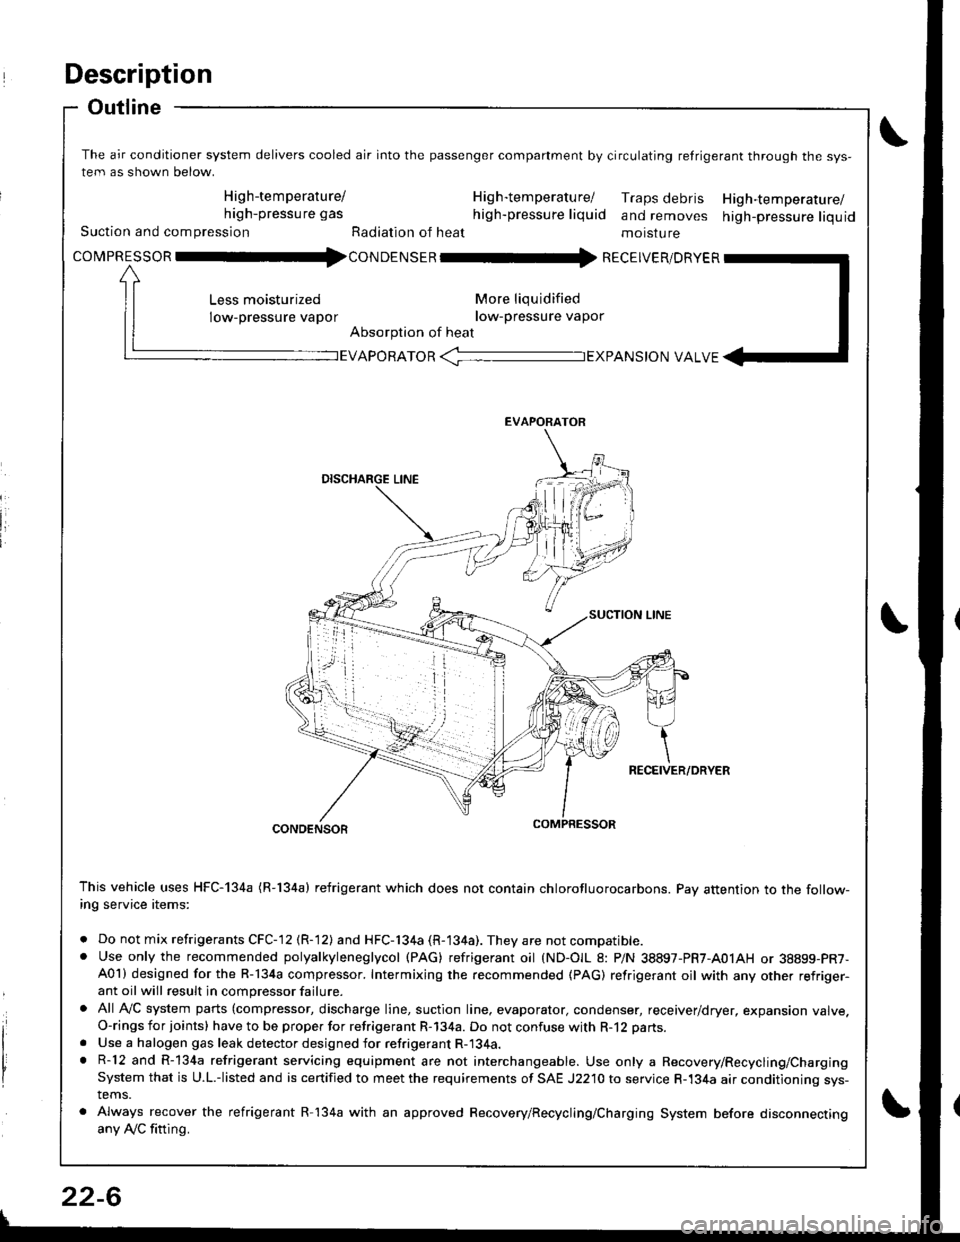 HONDA INTEGRA 1998 4.G Workshop Manual Description
Outline
The air conditioner system delivers cooled air into the passenger companment by circulating retrigerant through the sys-
tem as shown below.
High-temperature/ H ig h-tem peratu rel